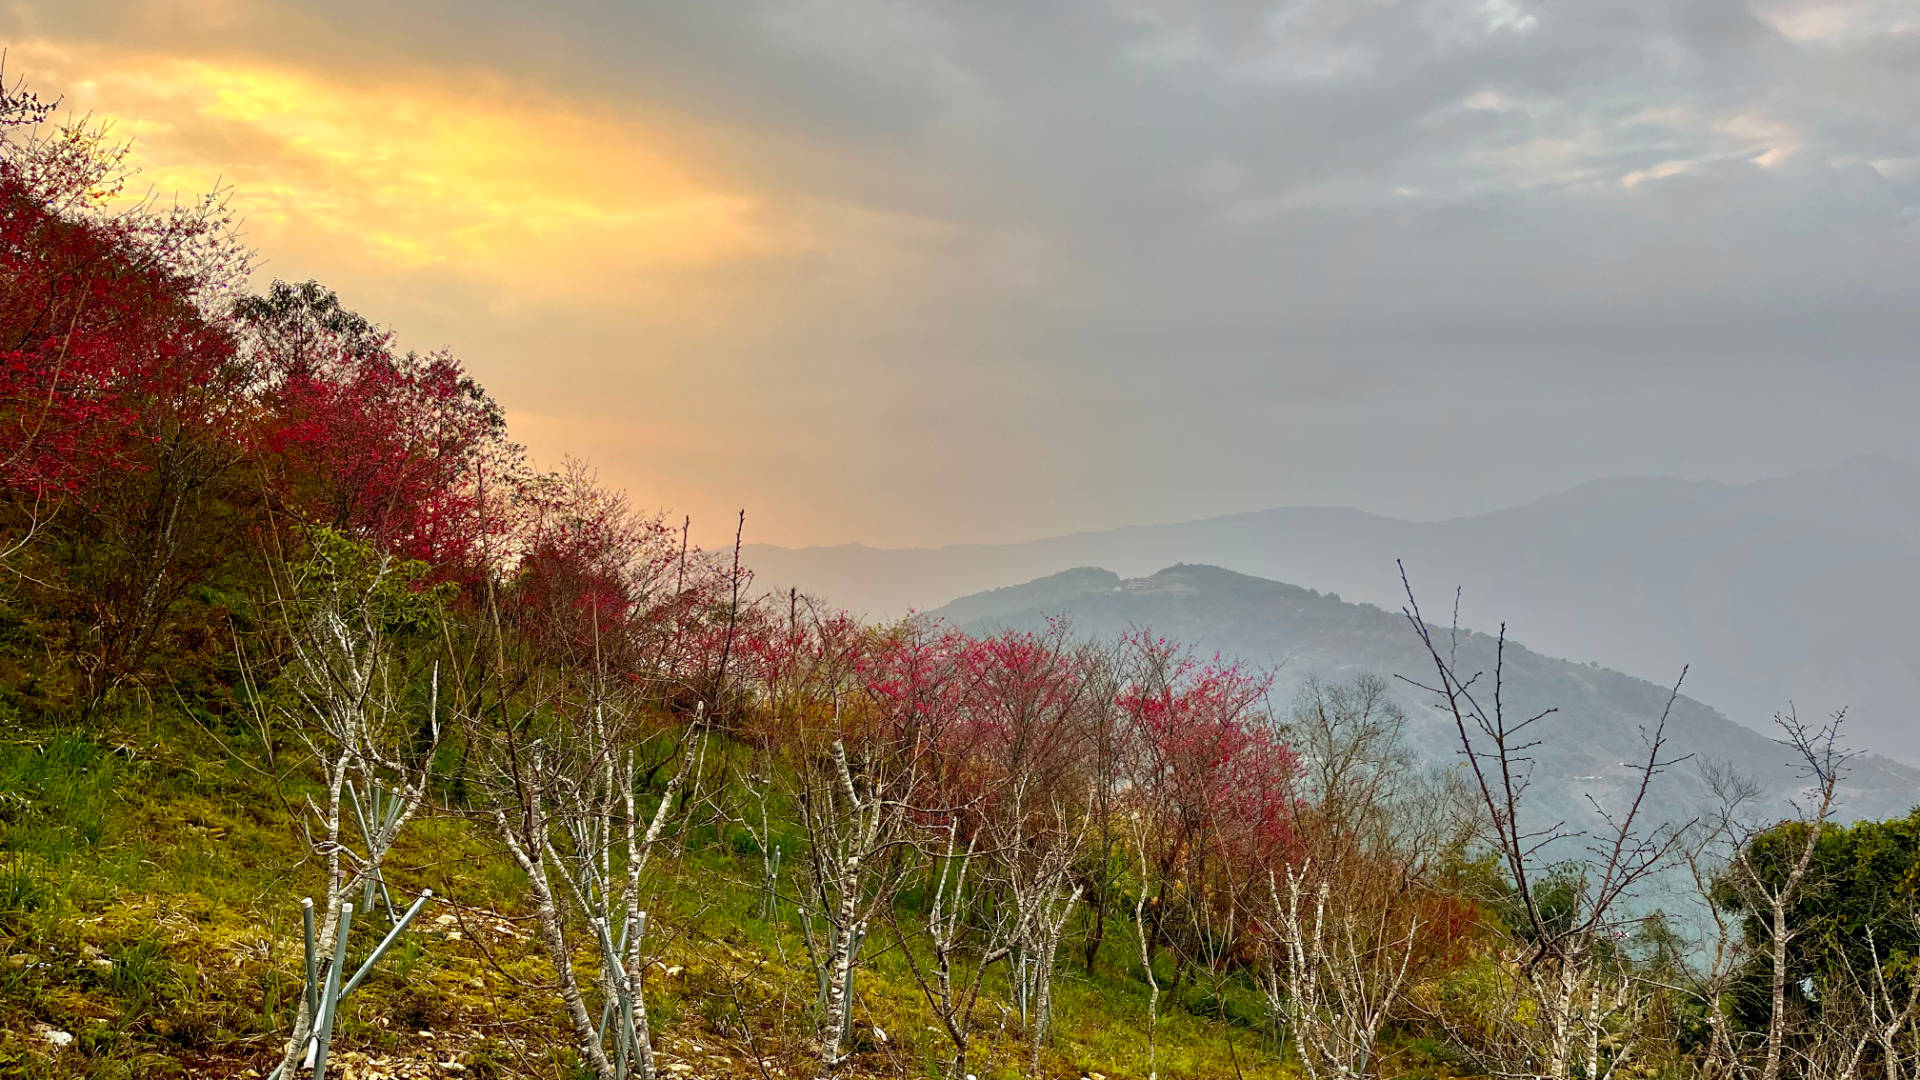 Dark cherry blossom trees in the foreground, with a golden sky above the mountains in the distance.